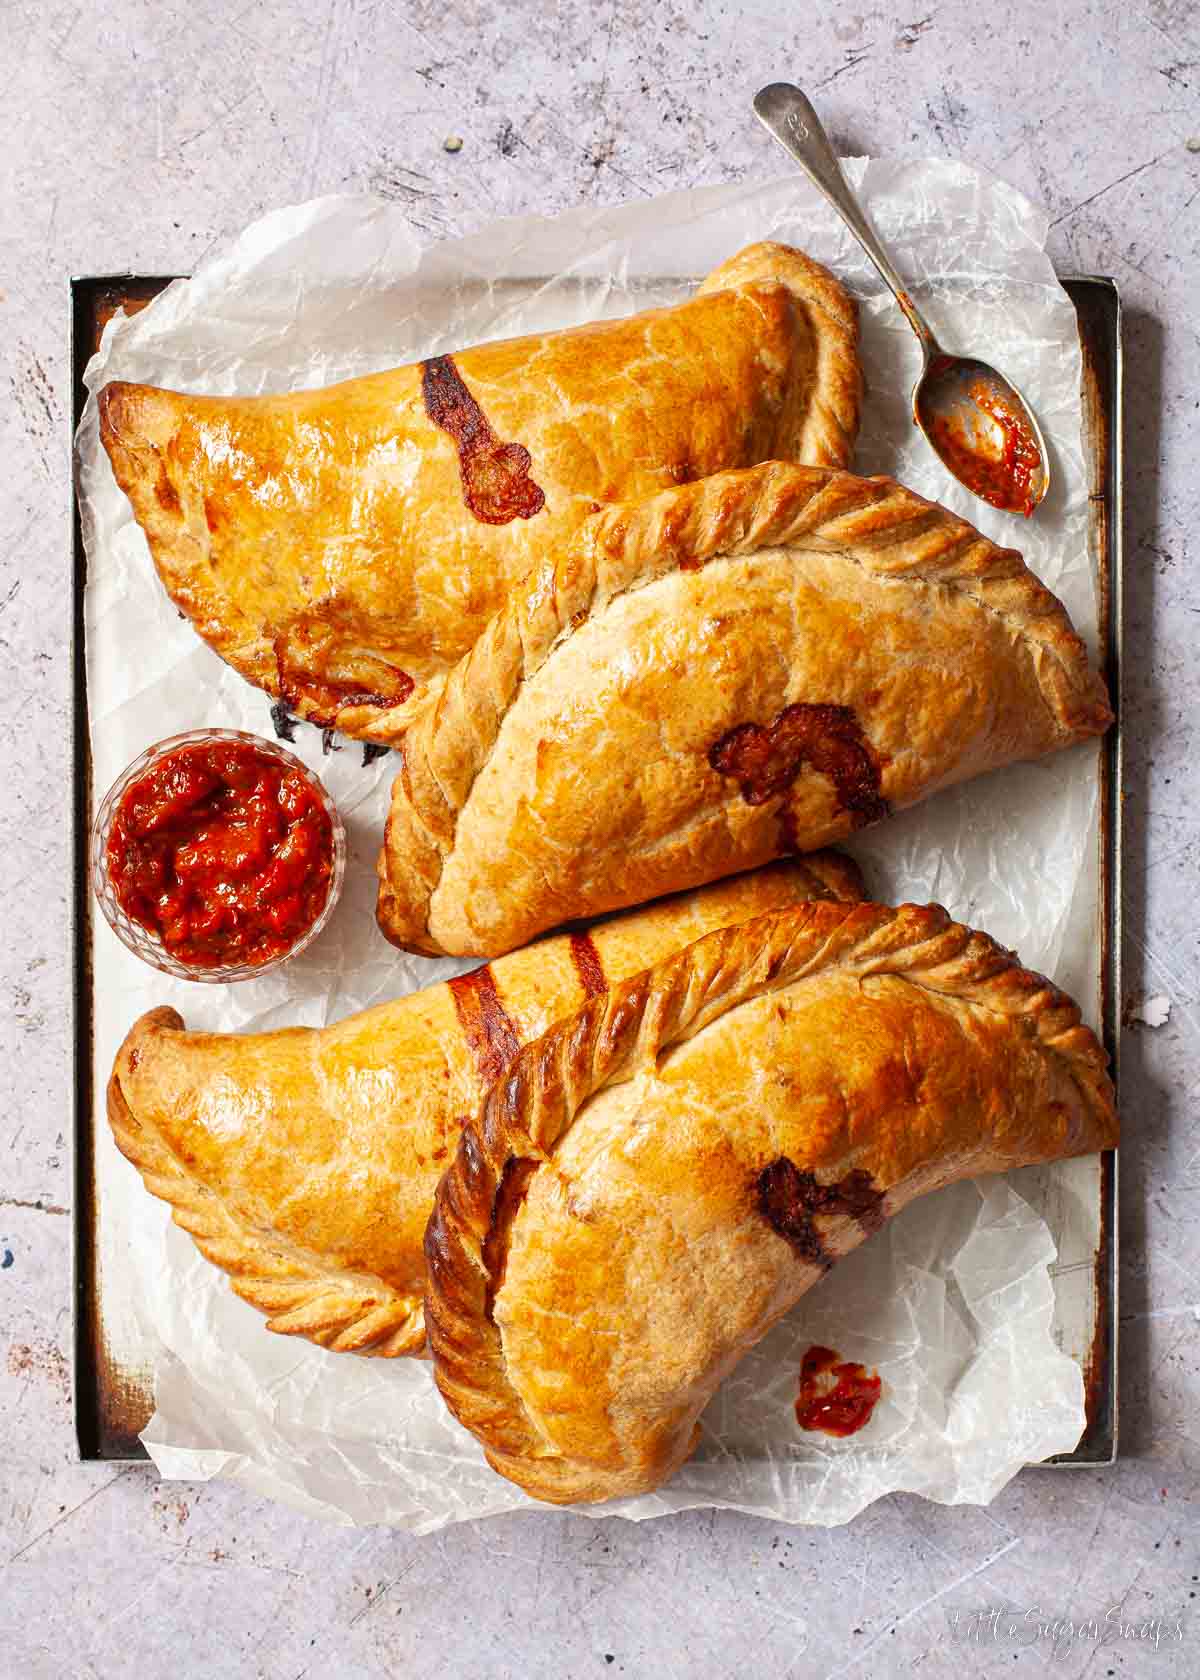 Cheese and onion pasties on a baking tray with a pot of tomato relish.